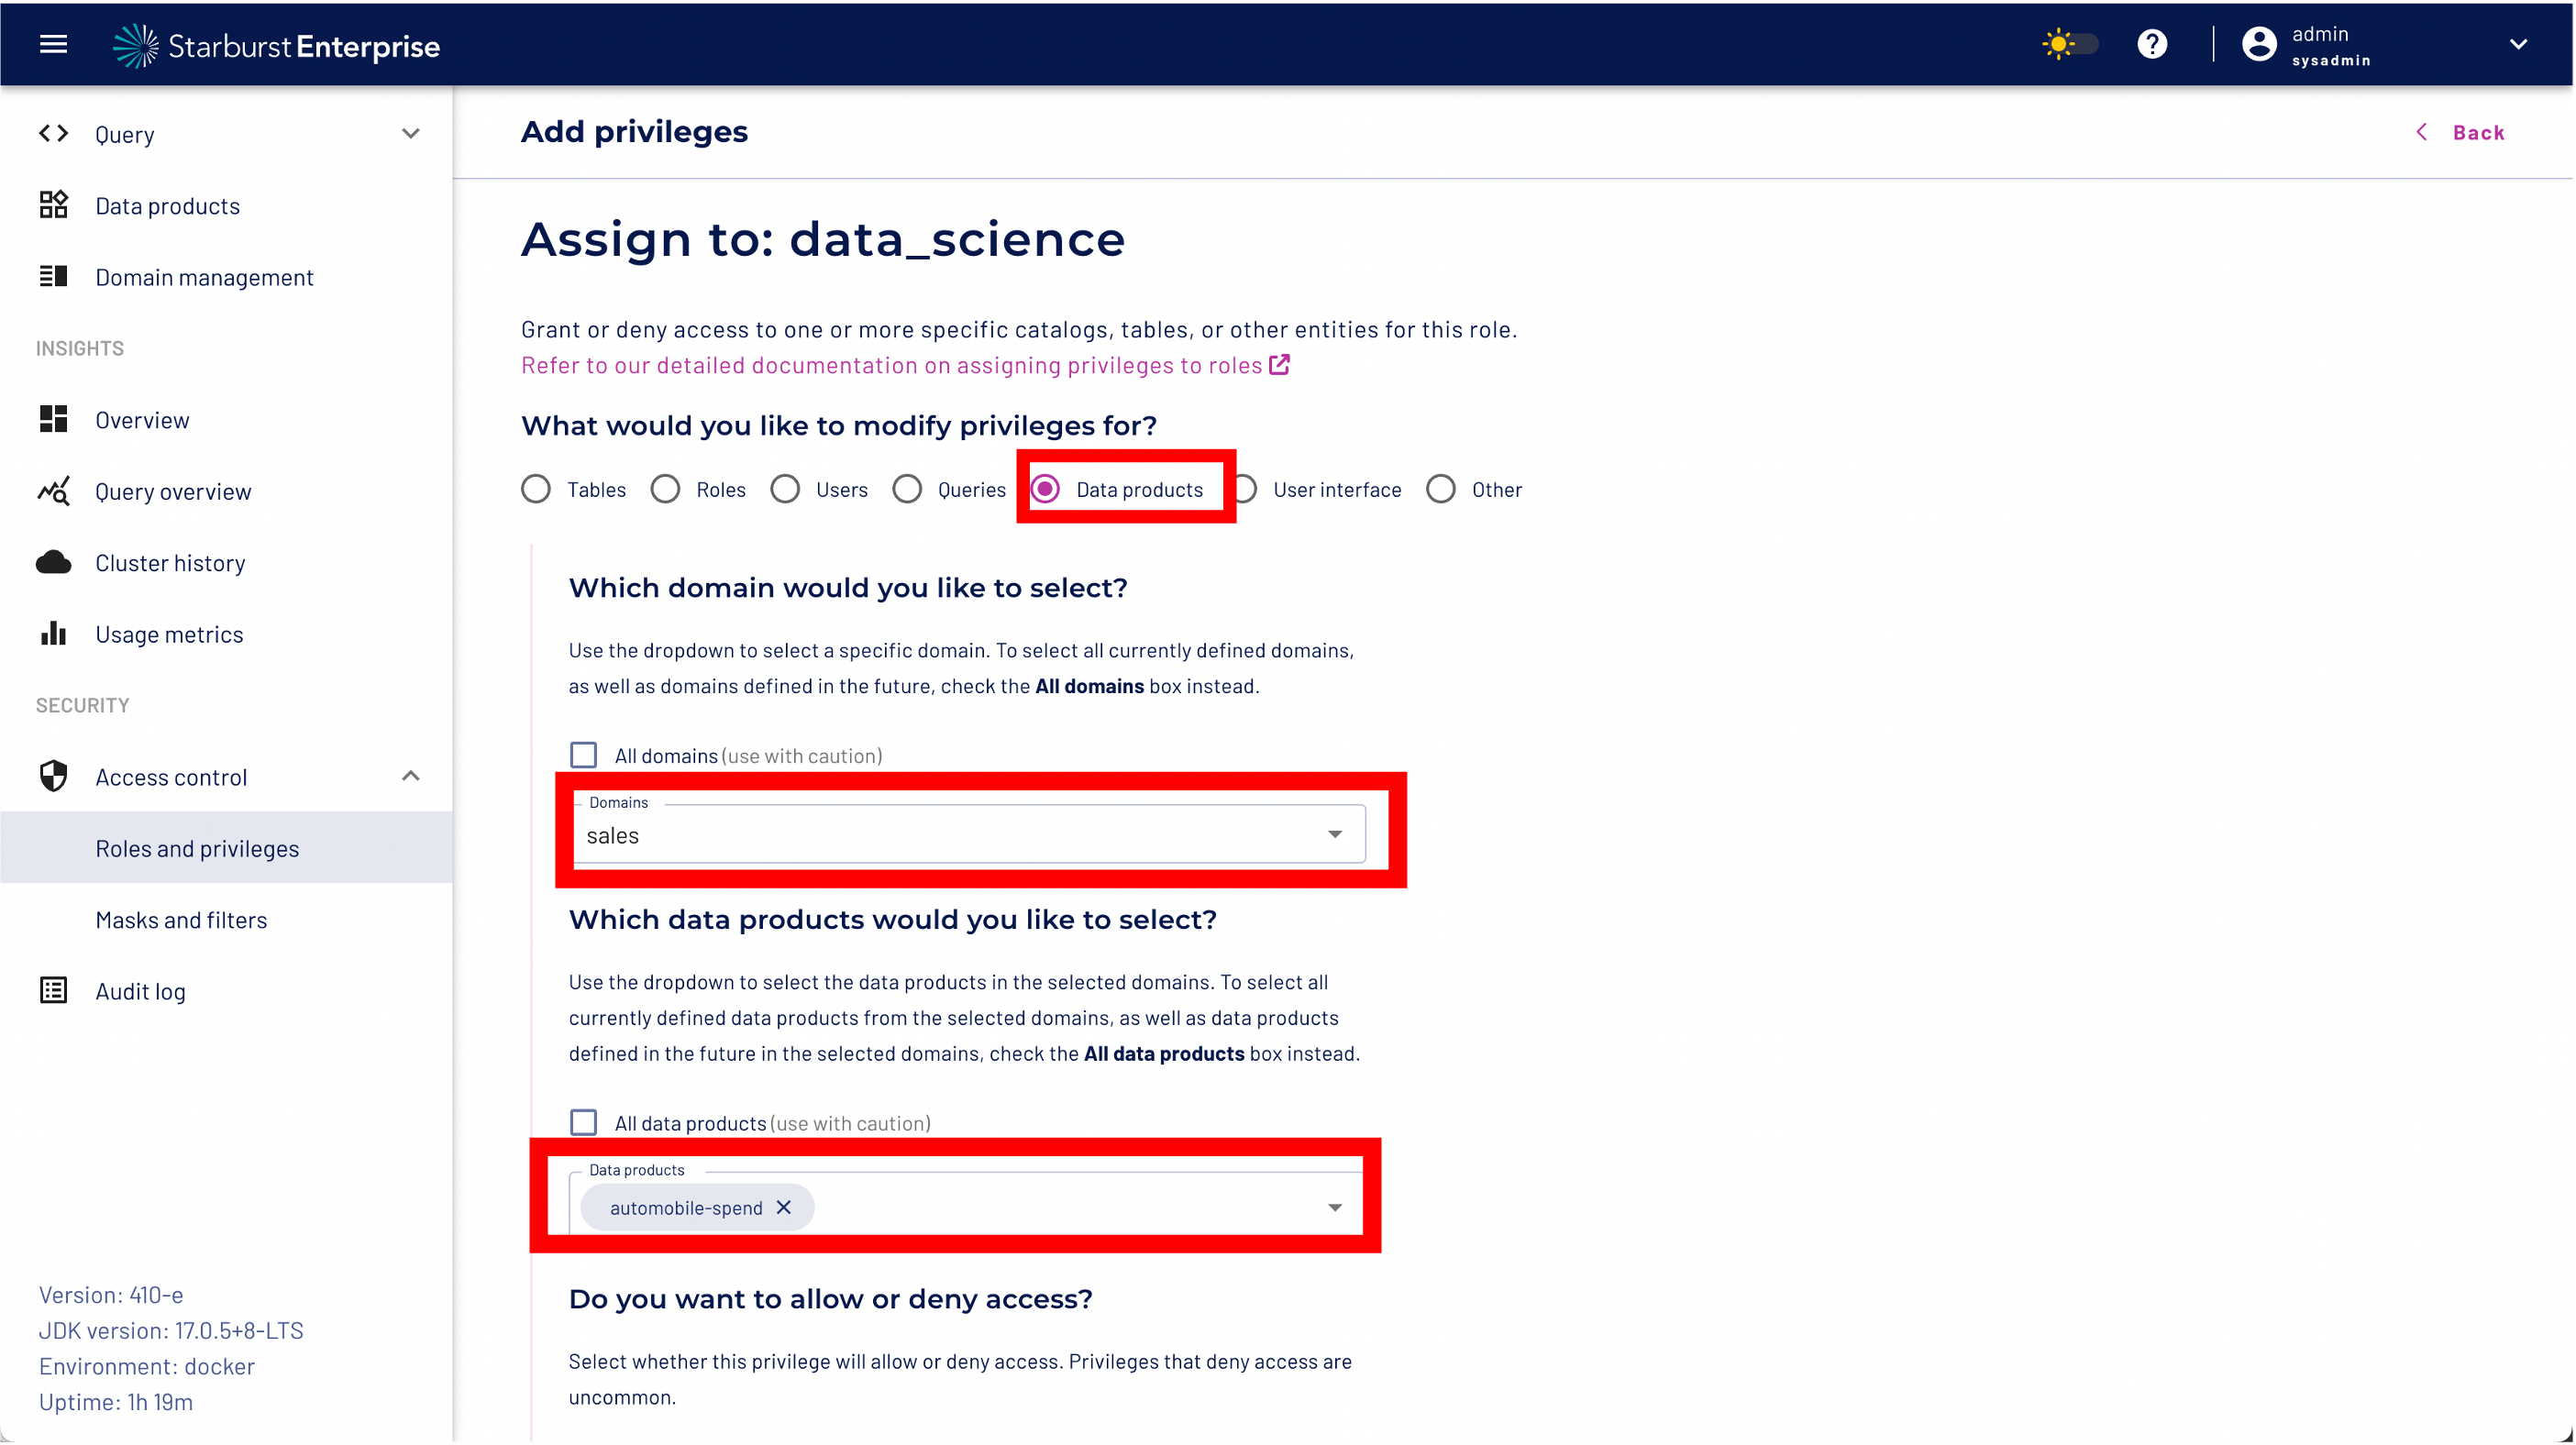 Add Data Procduct privileges to the data_science role